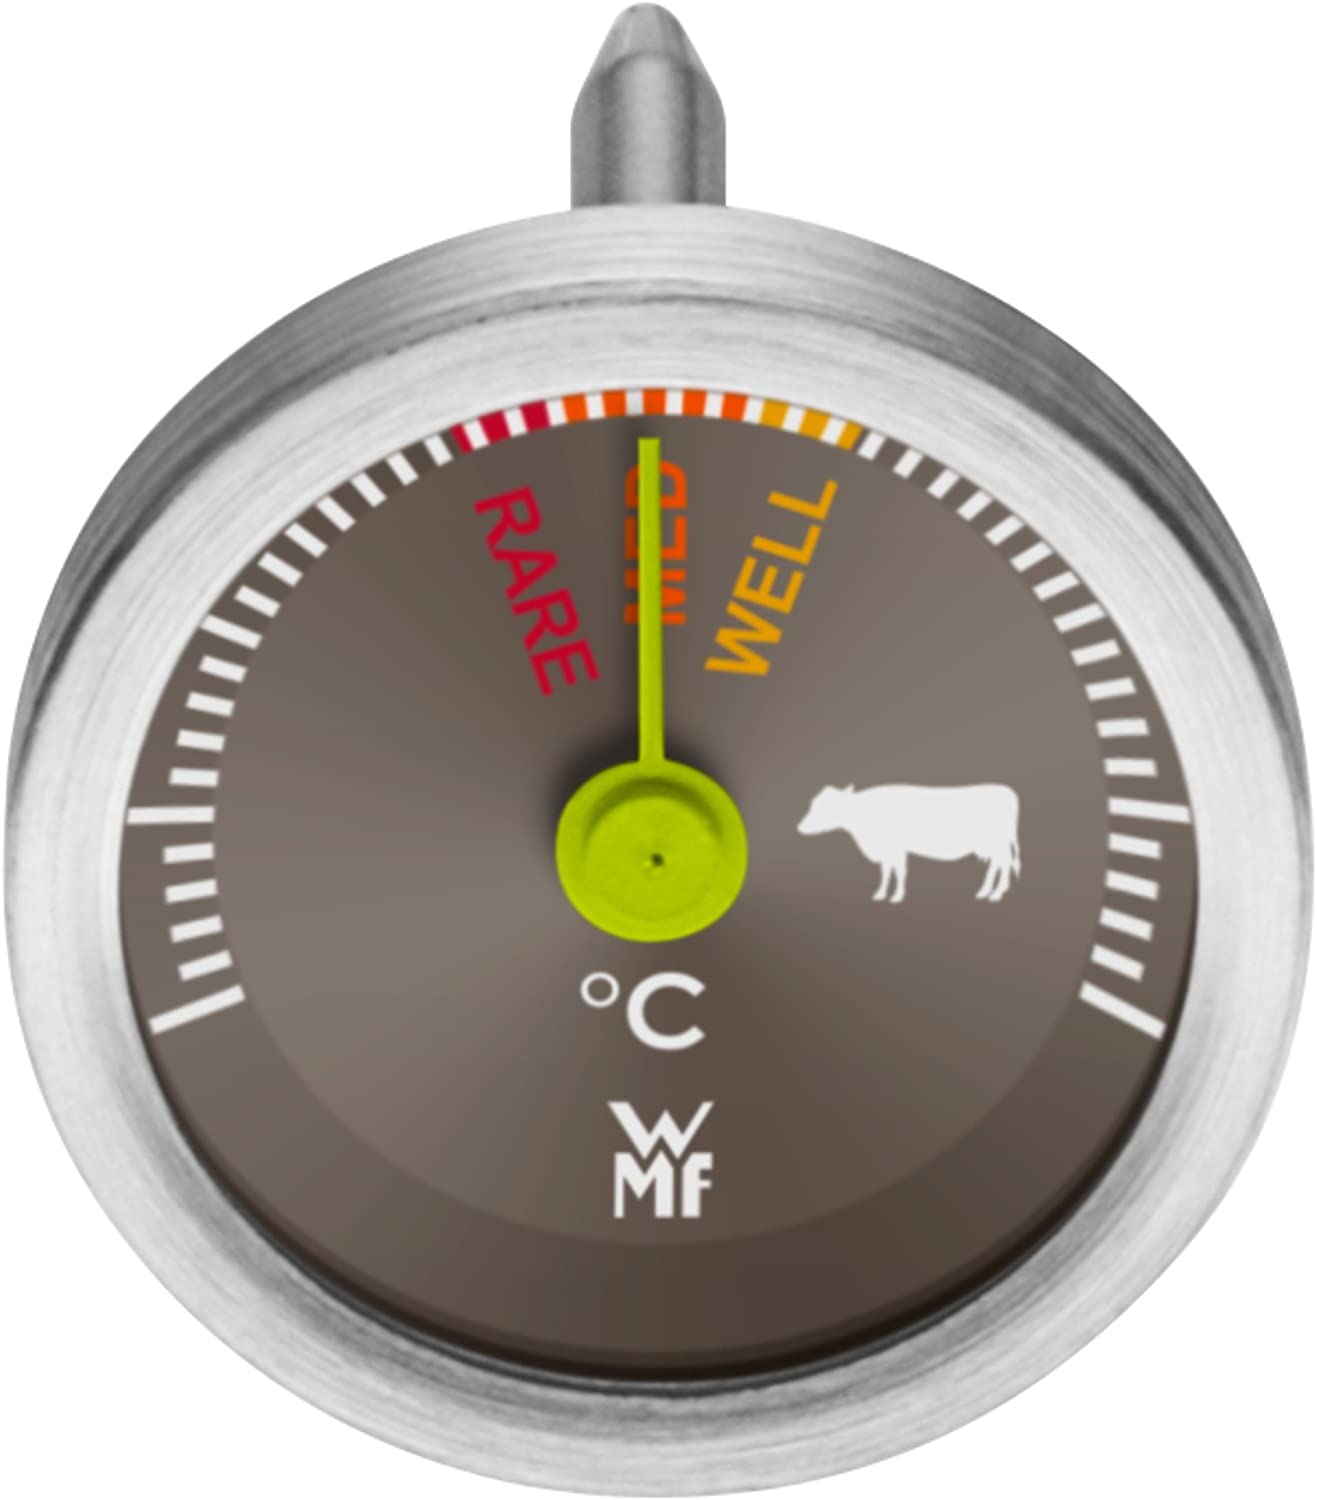 WMF Steak Thermometer, Analogue, 2.6 cm, Meat Thermometer with Yarn Marks for Rare, Med, Well, Roasting Thermometer